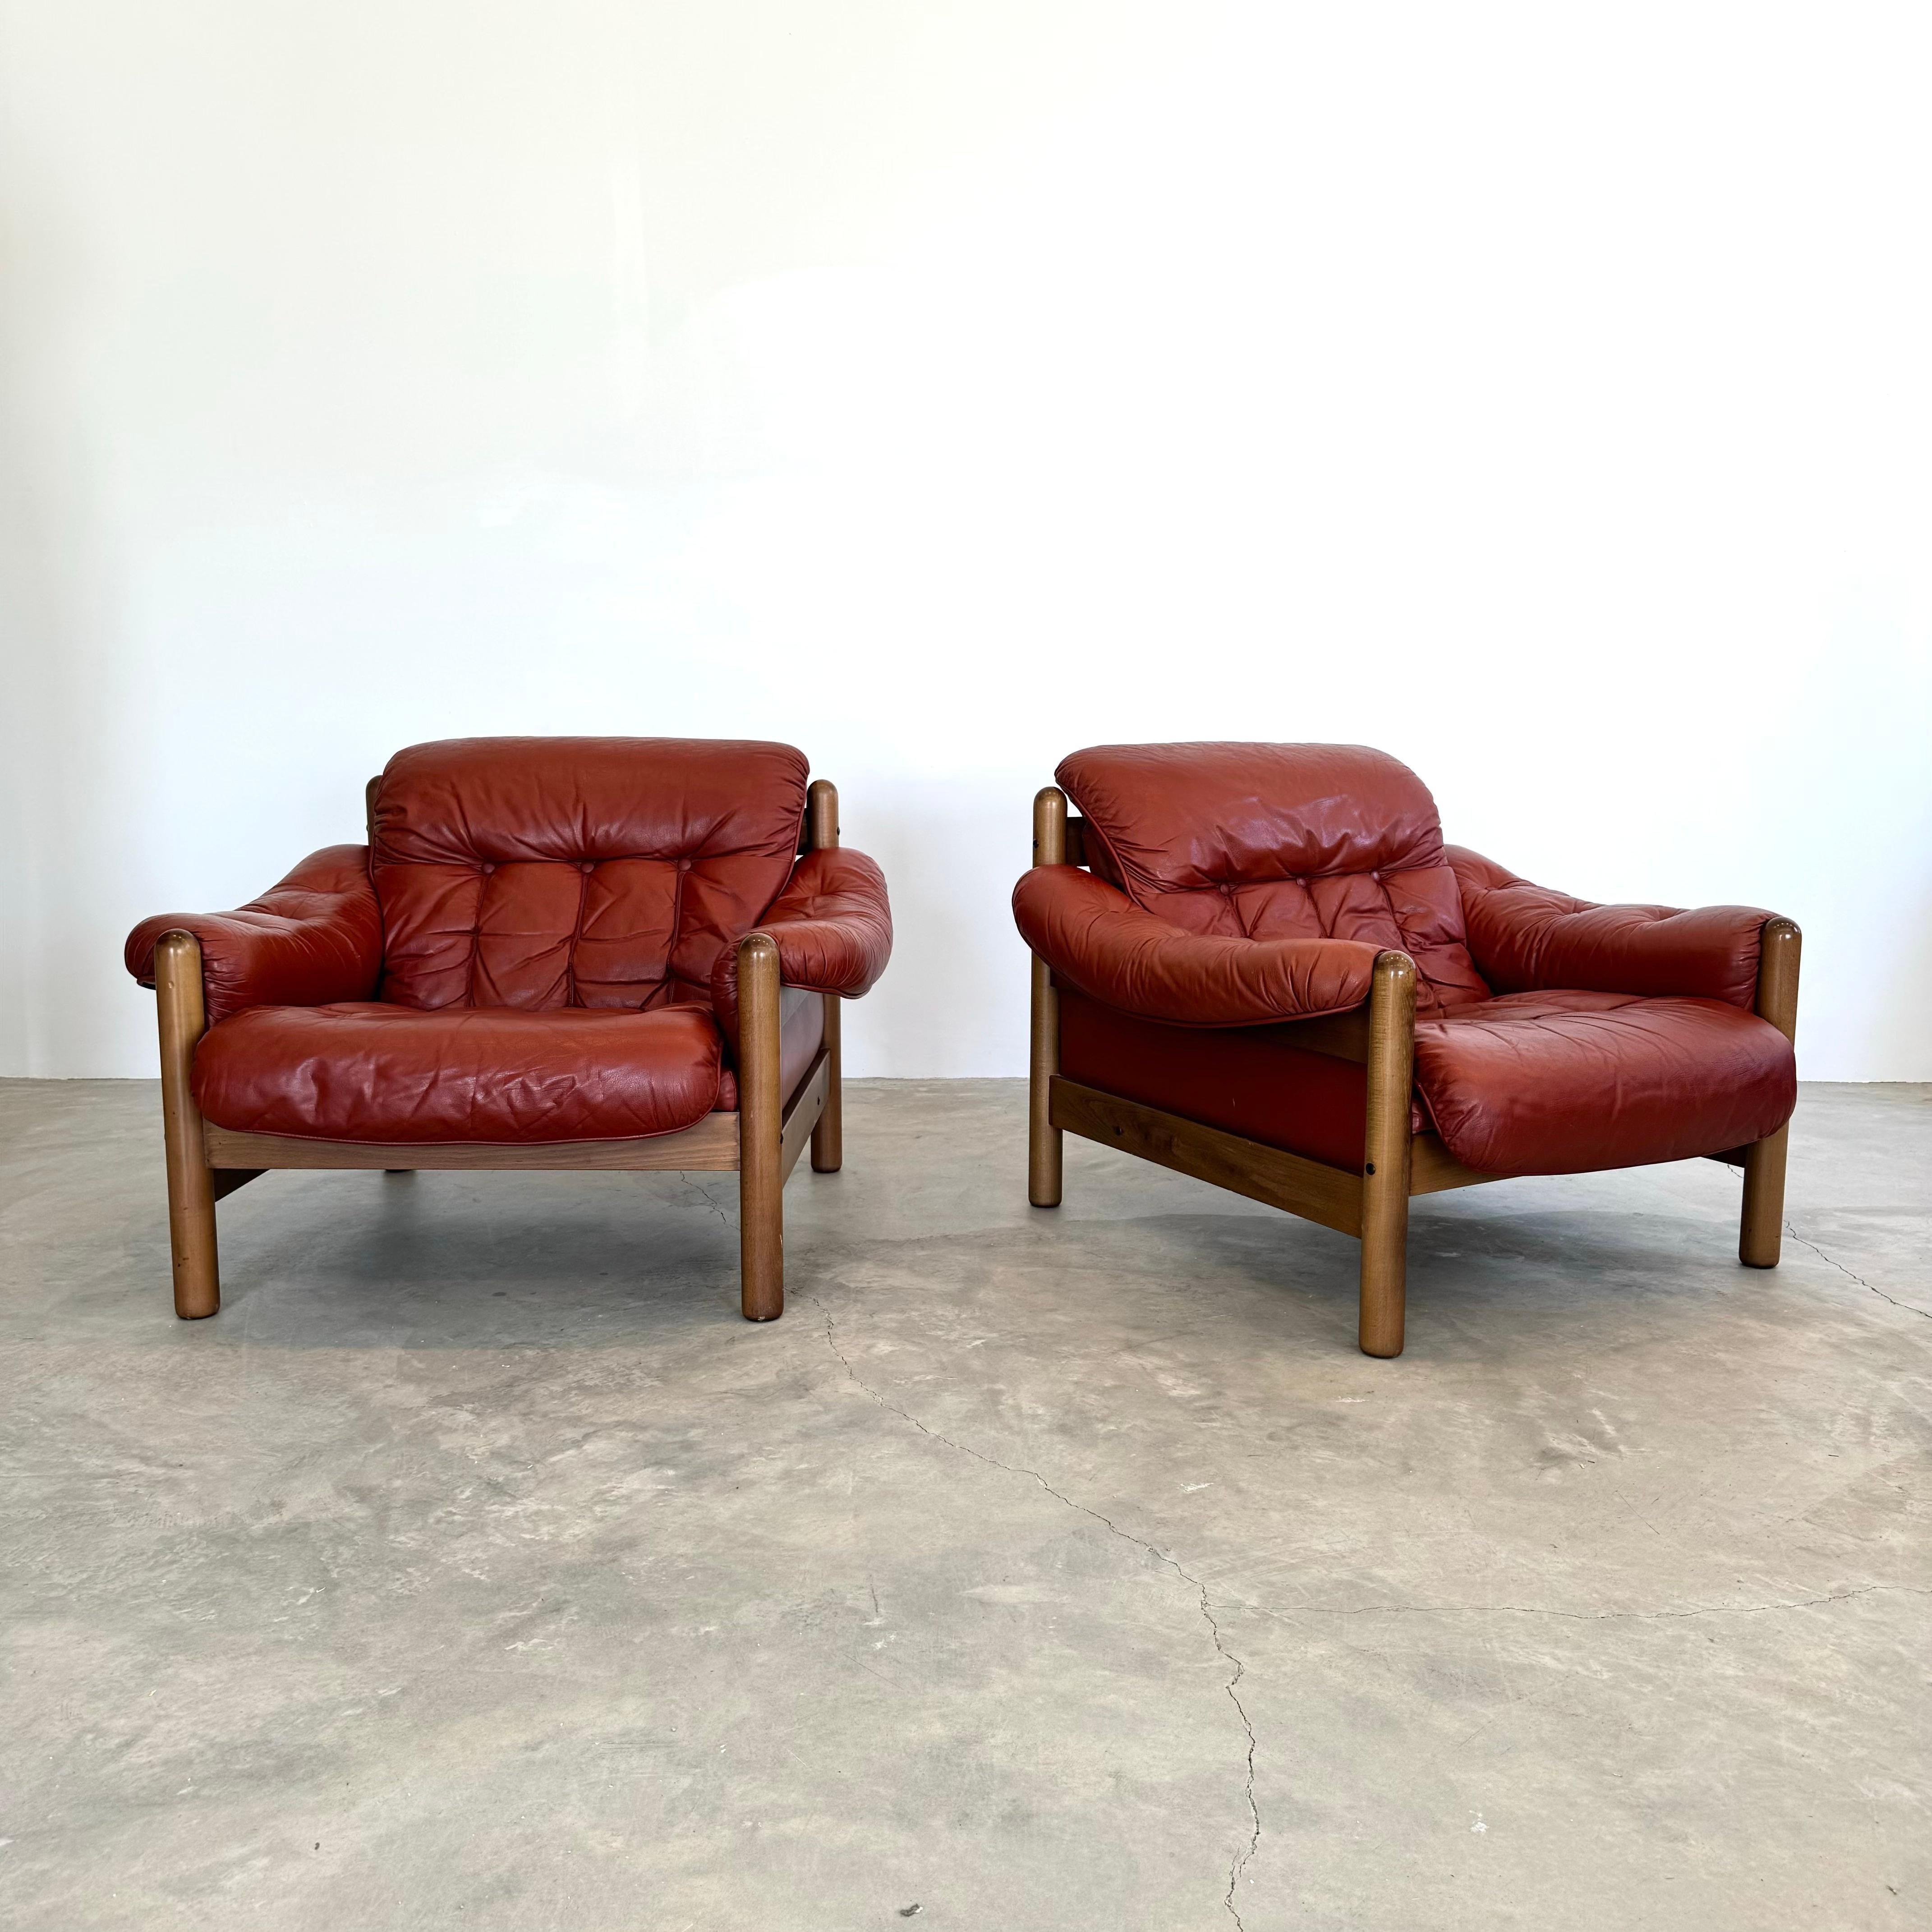 Swedish  Leather and Wood Club Chairs, Sweden 1970s